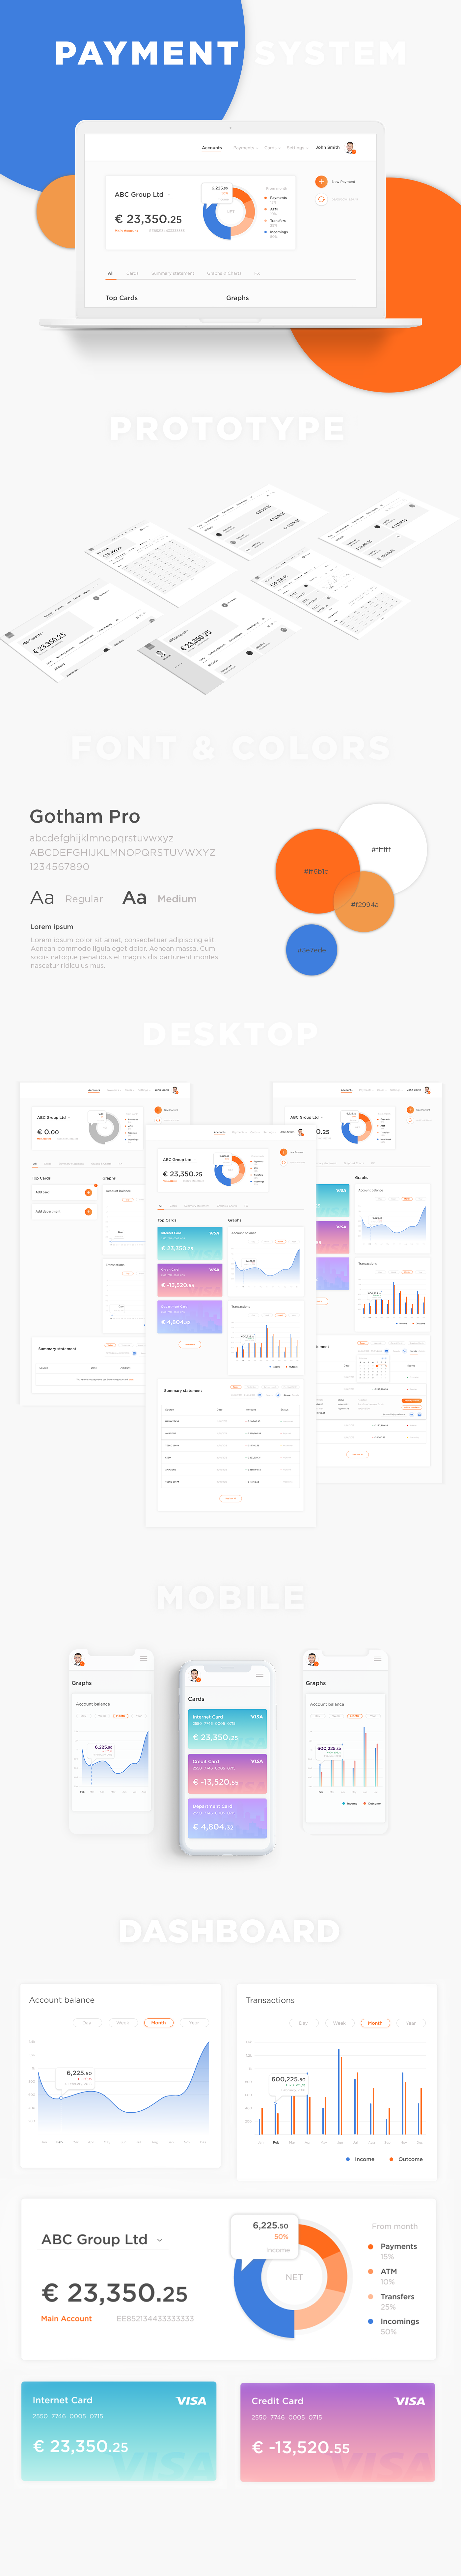 payment system UI/UX payment web-design dashboard chart design Interface UI charts